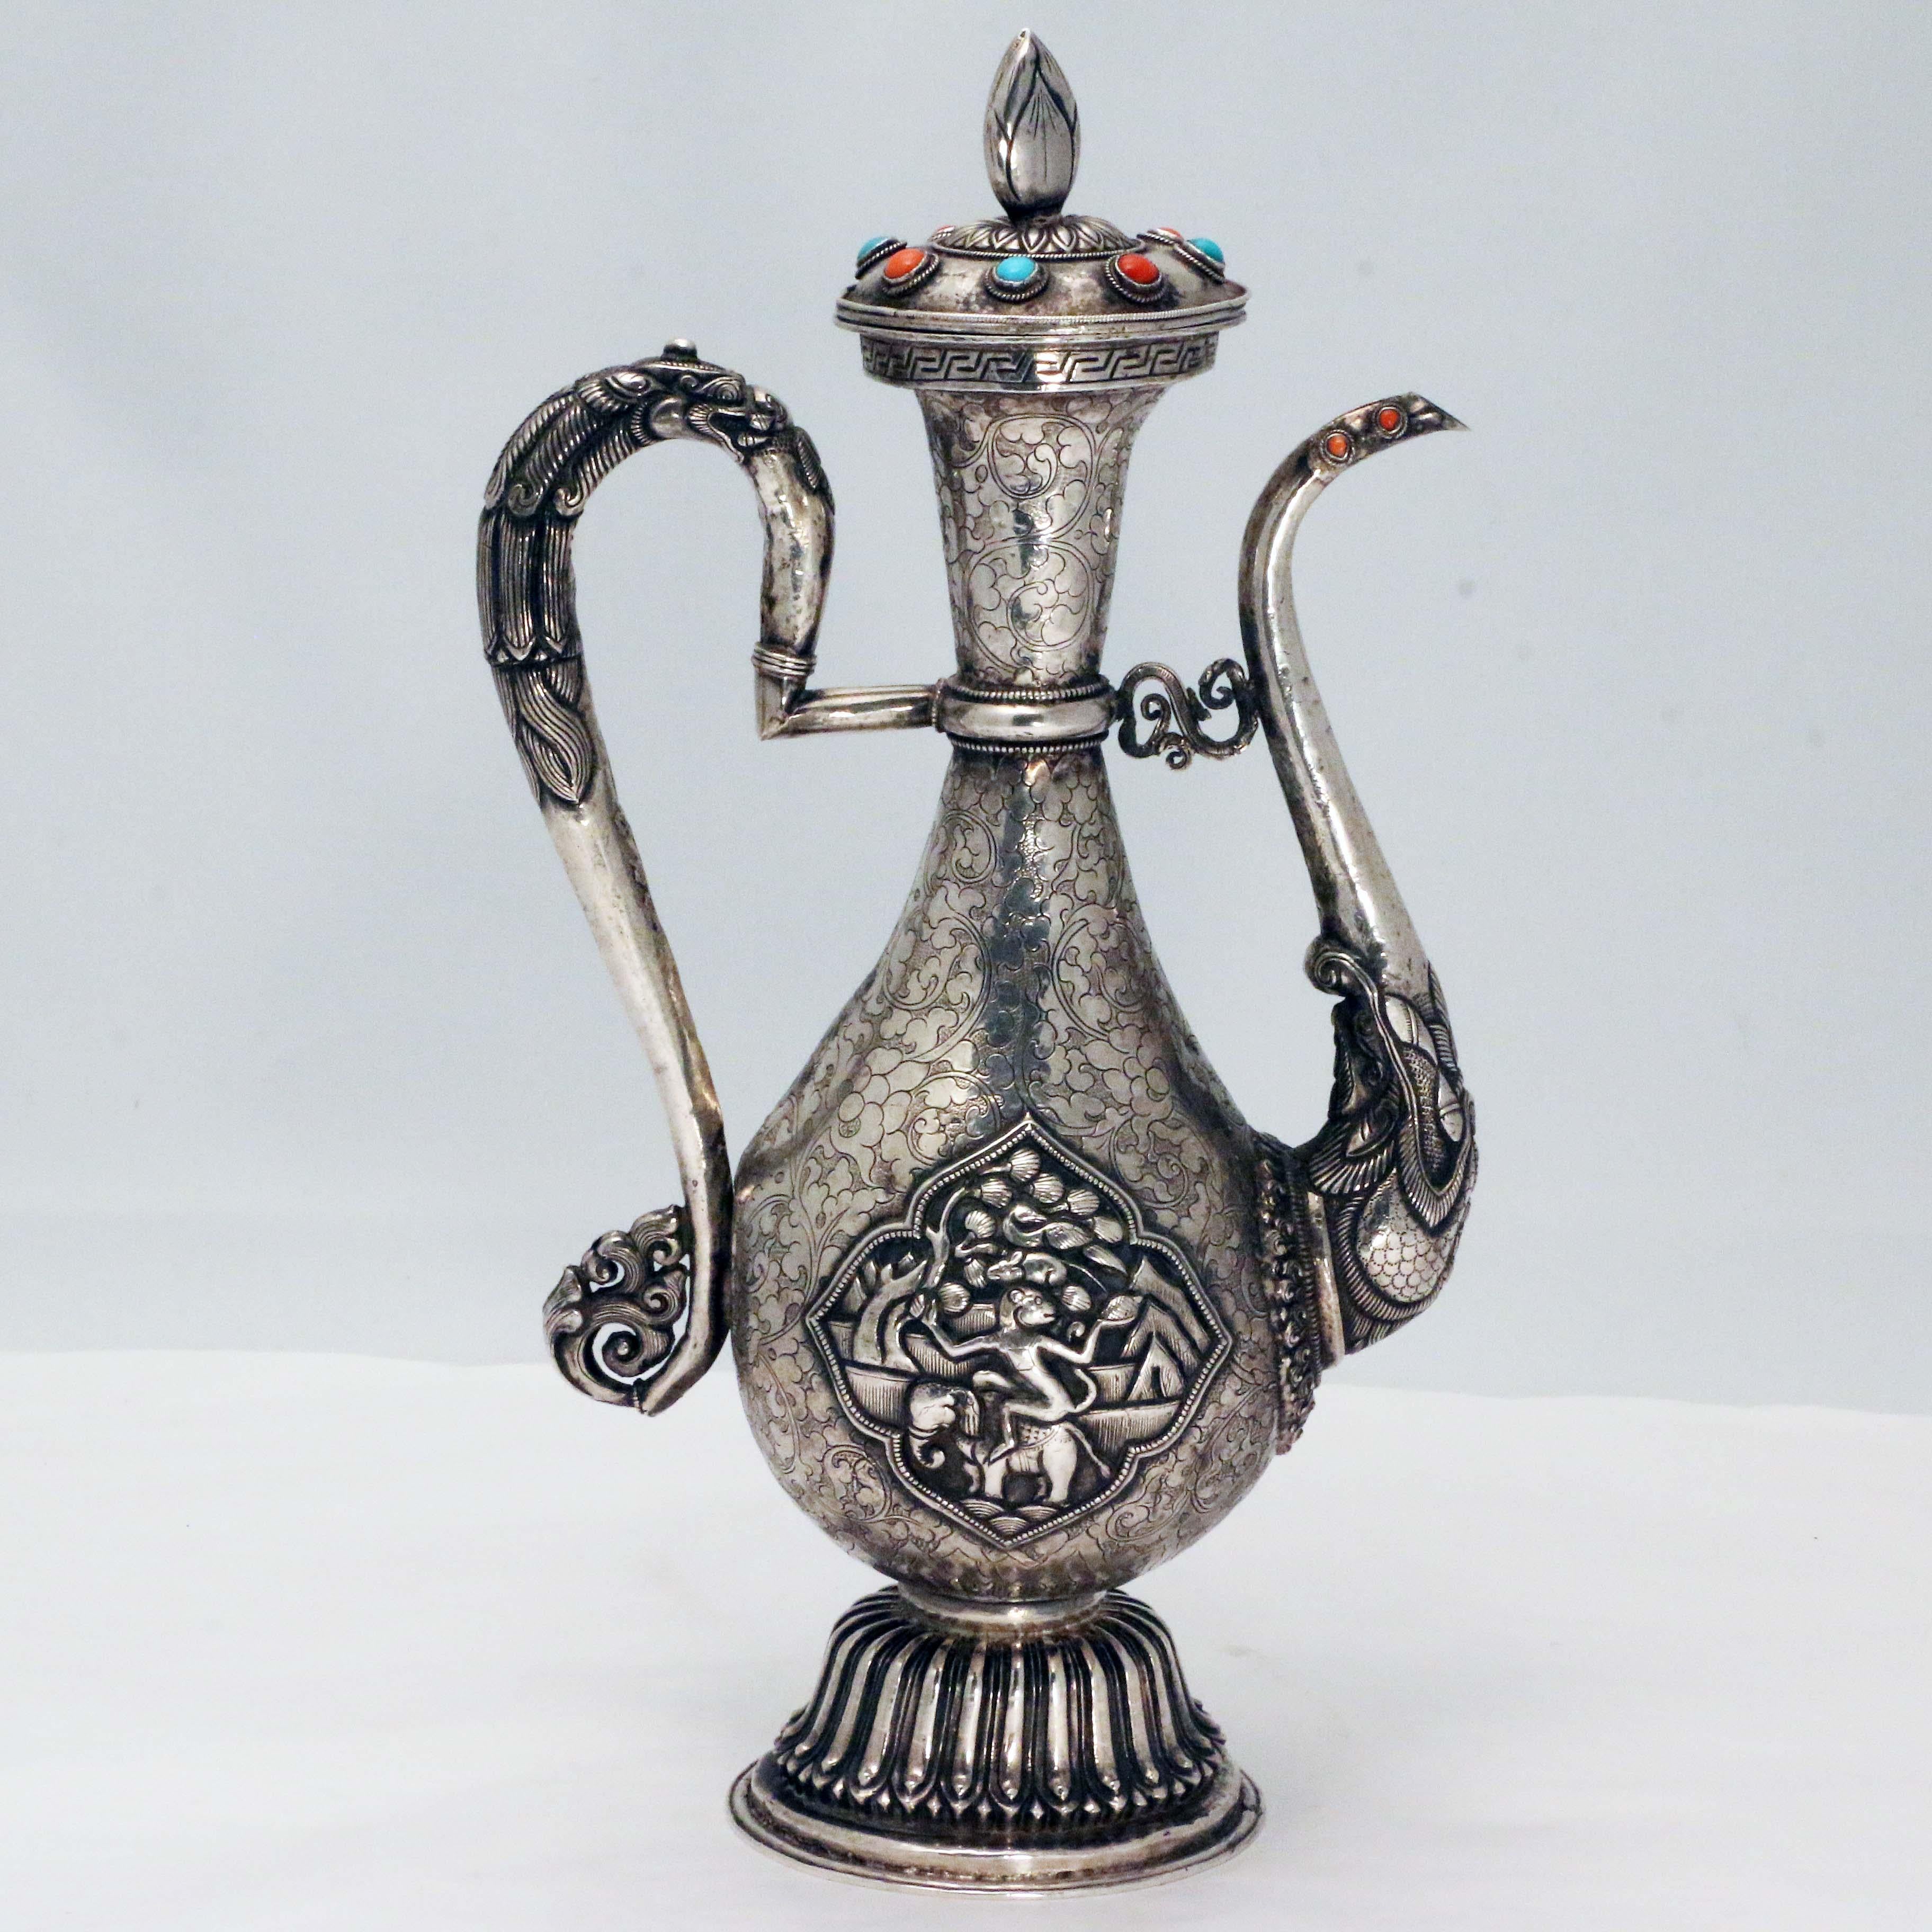 This is a water ewer used in Tibetan ritual offerings to the 